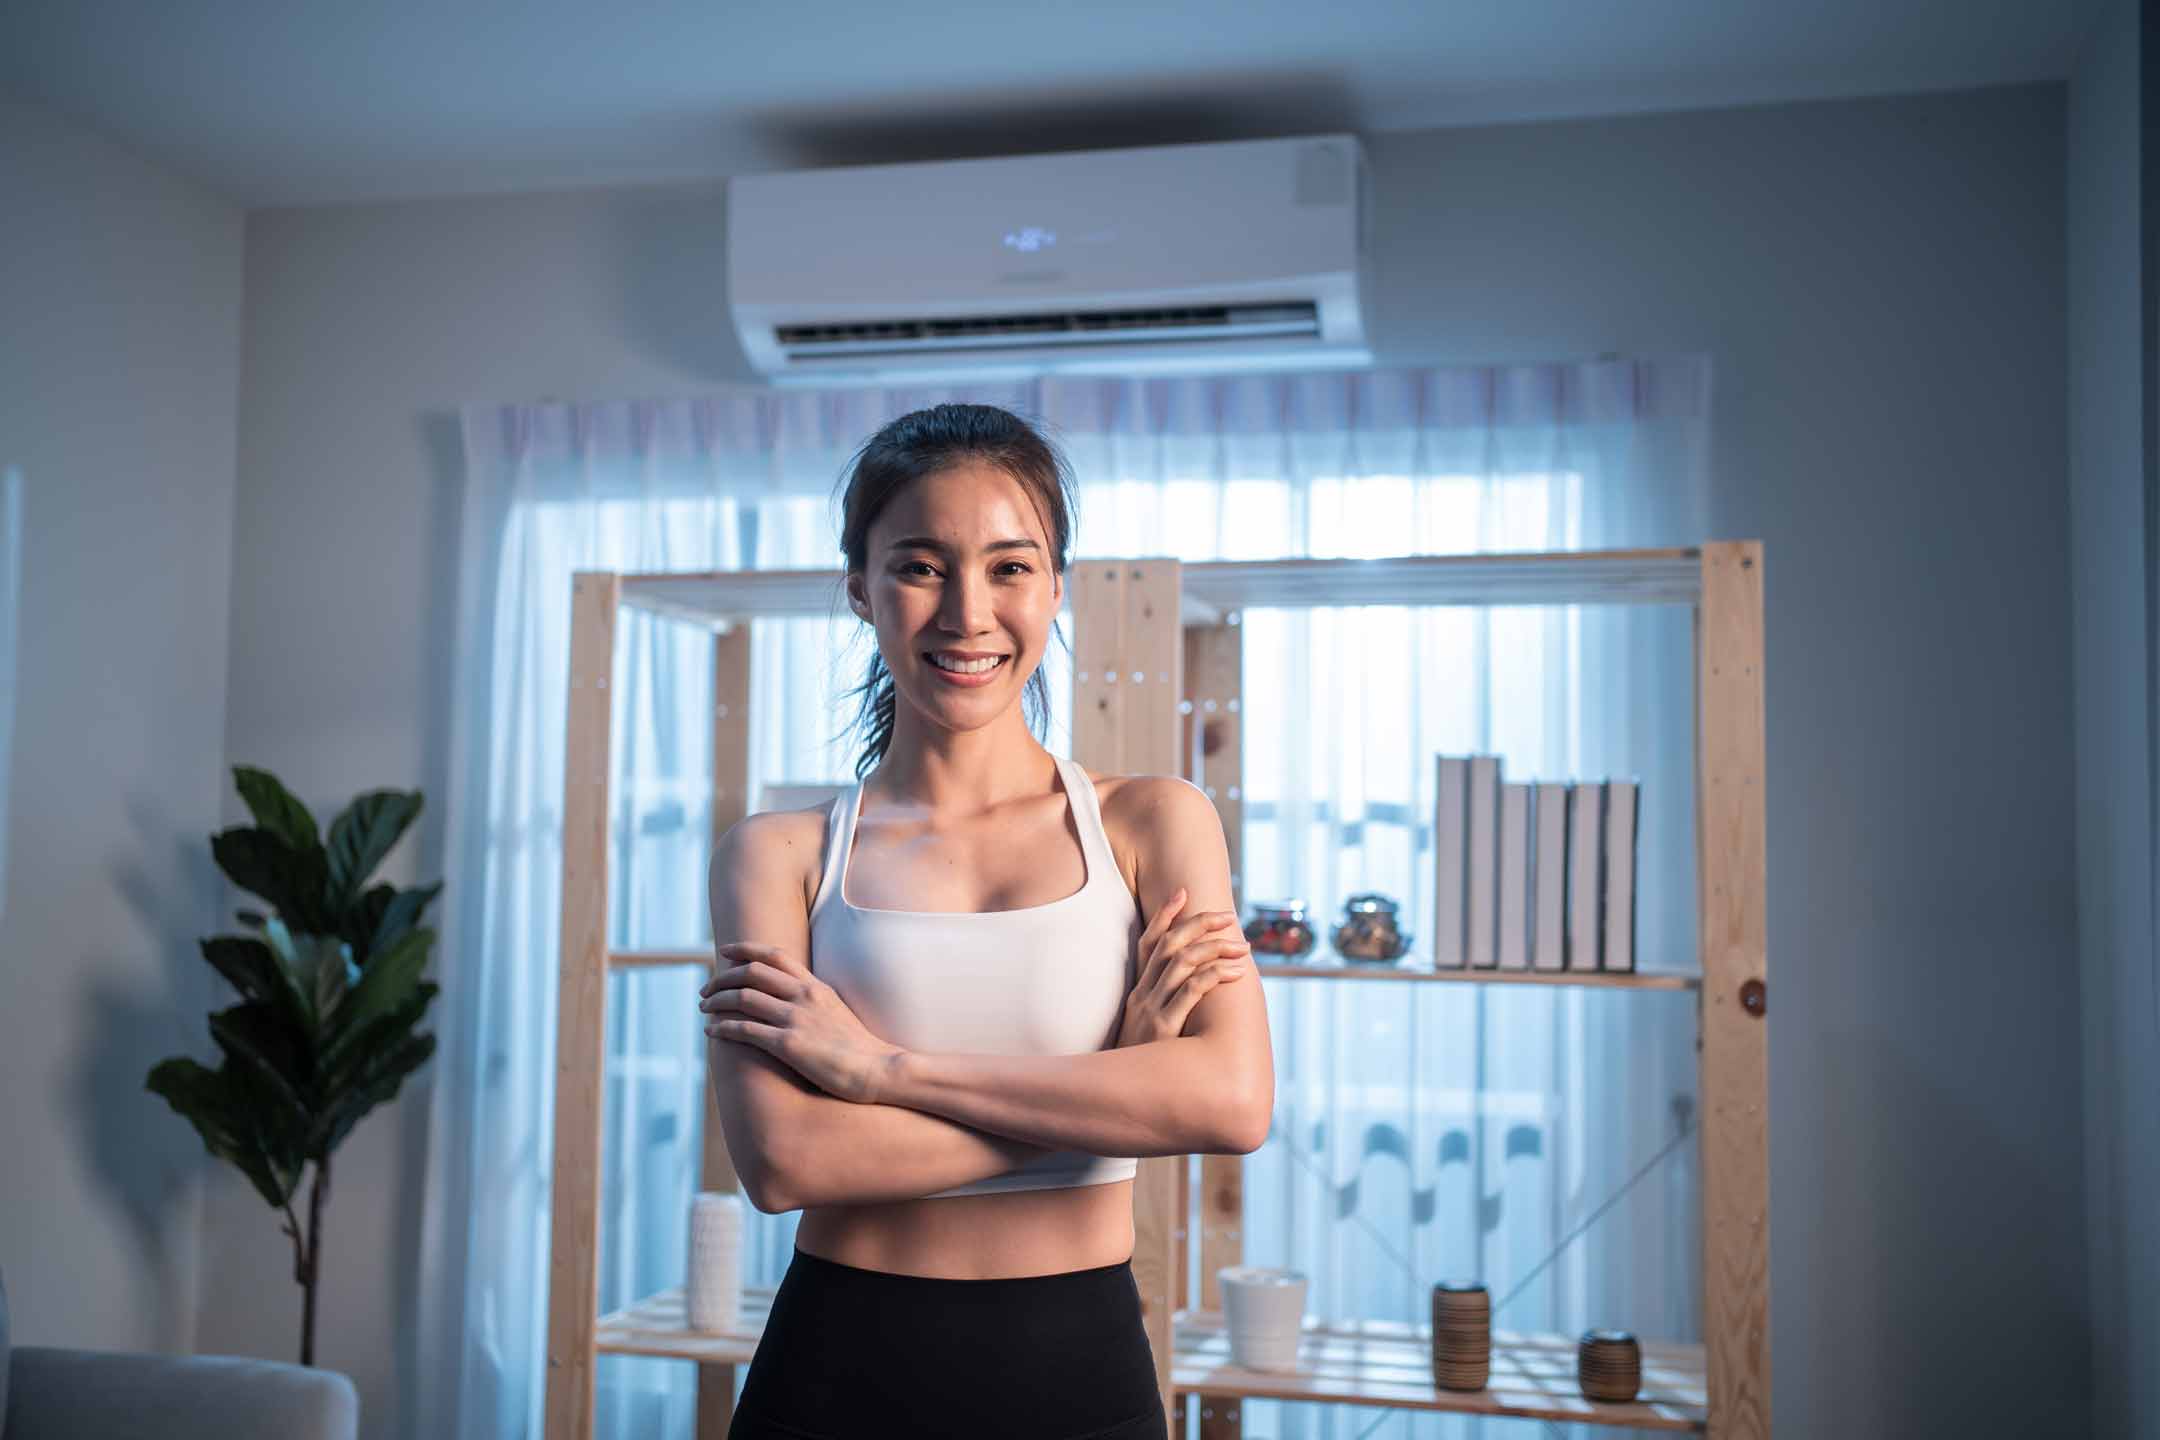 Air Conditioning Ductless Mini Split keeping girl cool in Texas